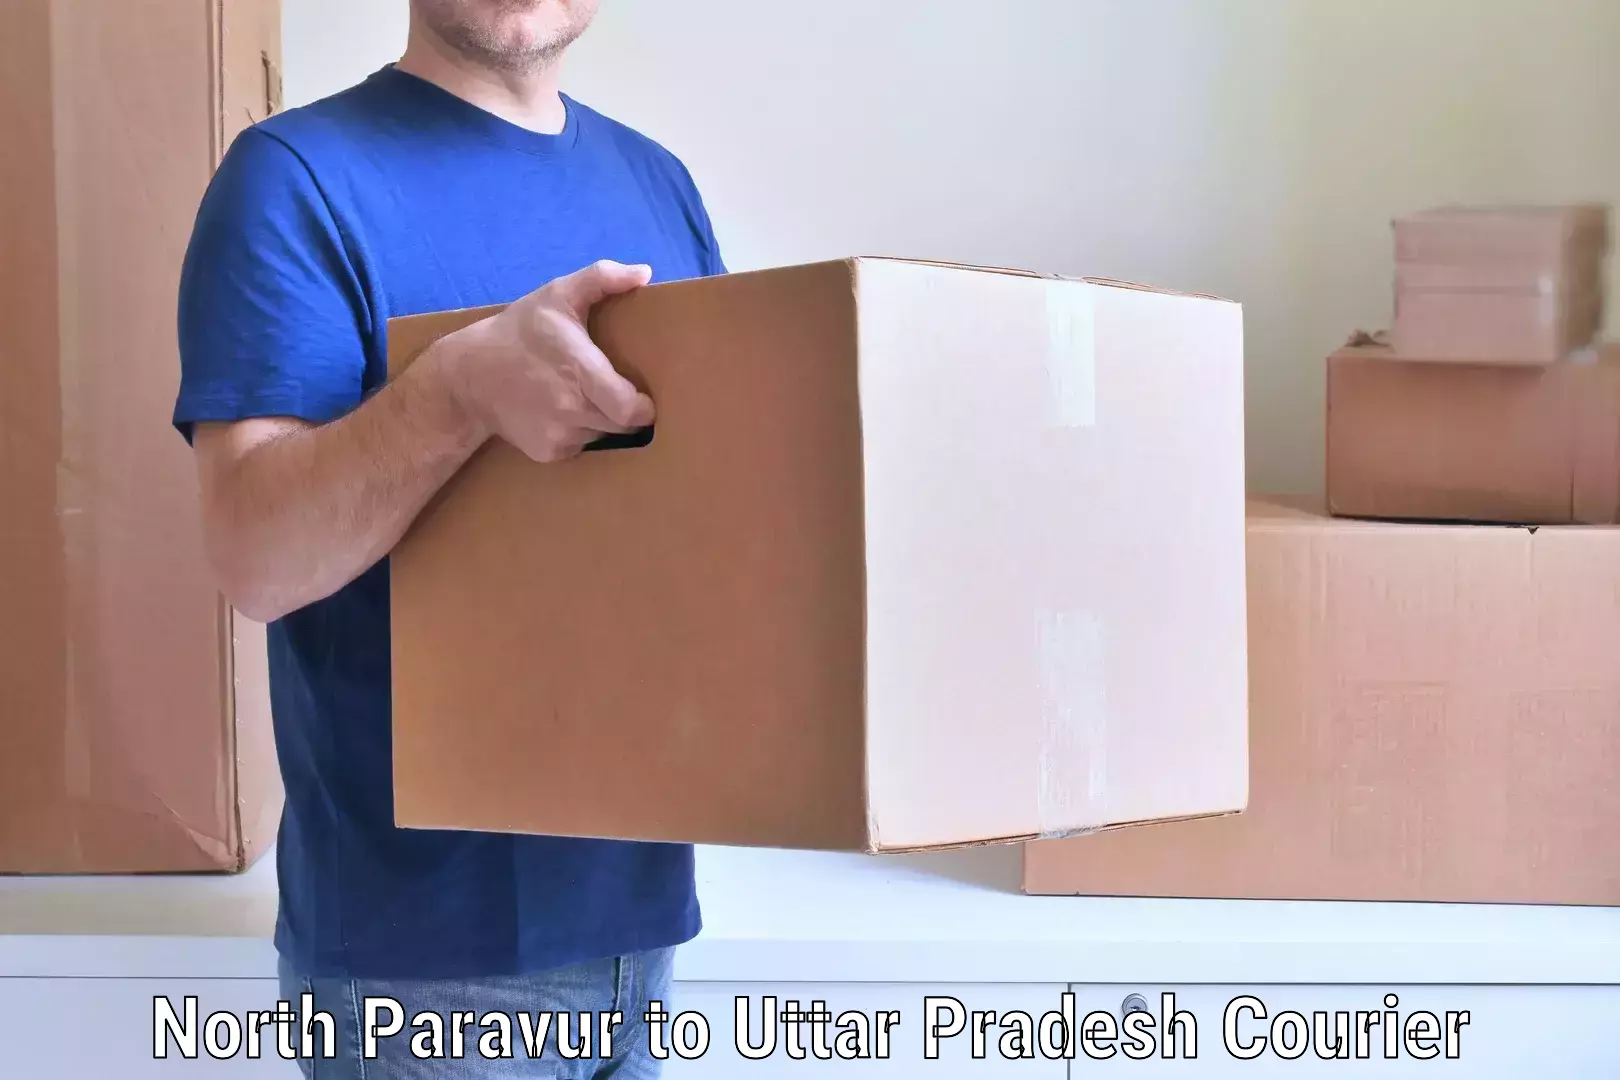 Furniture moving and handling North Paravur to Agra